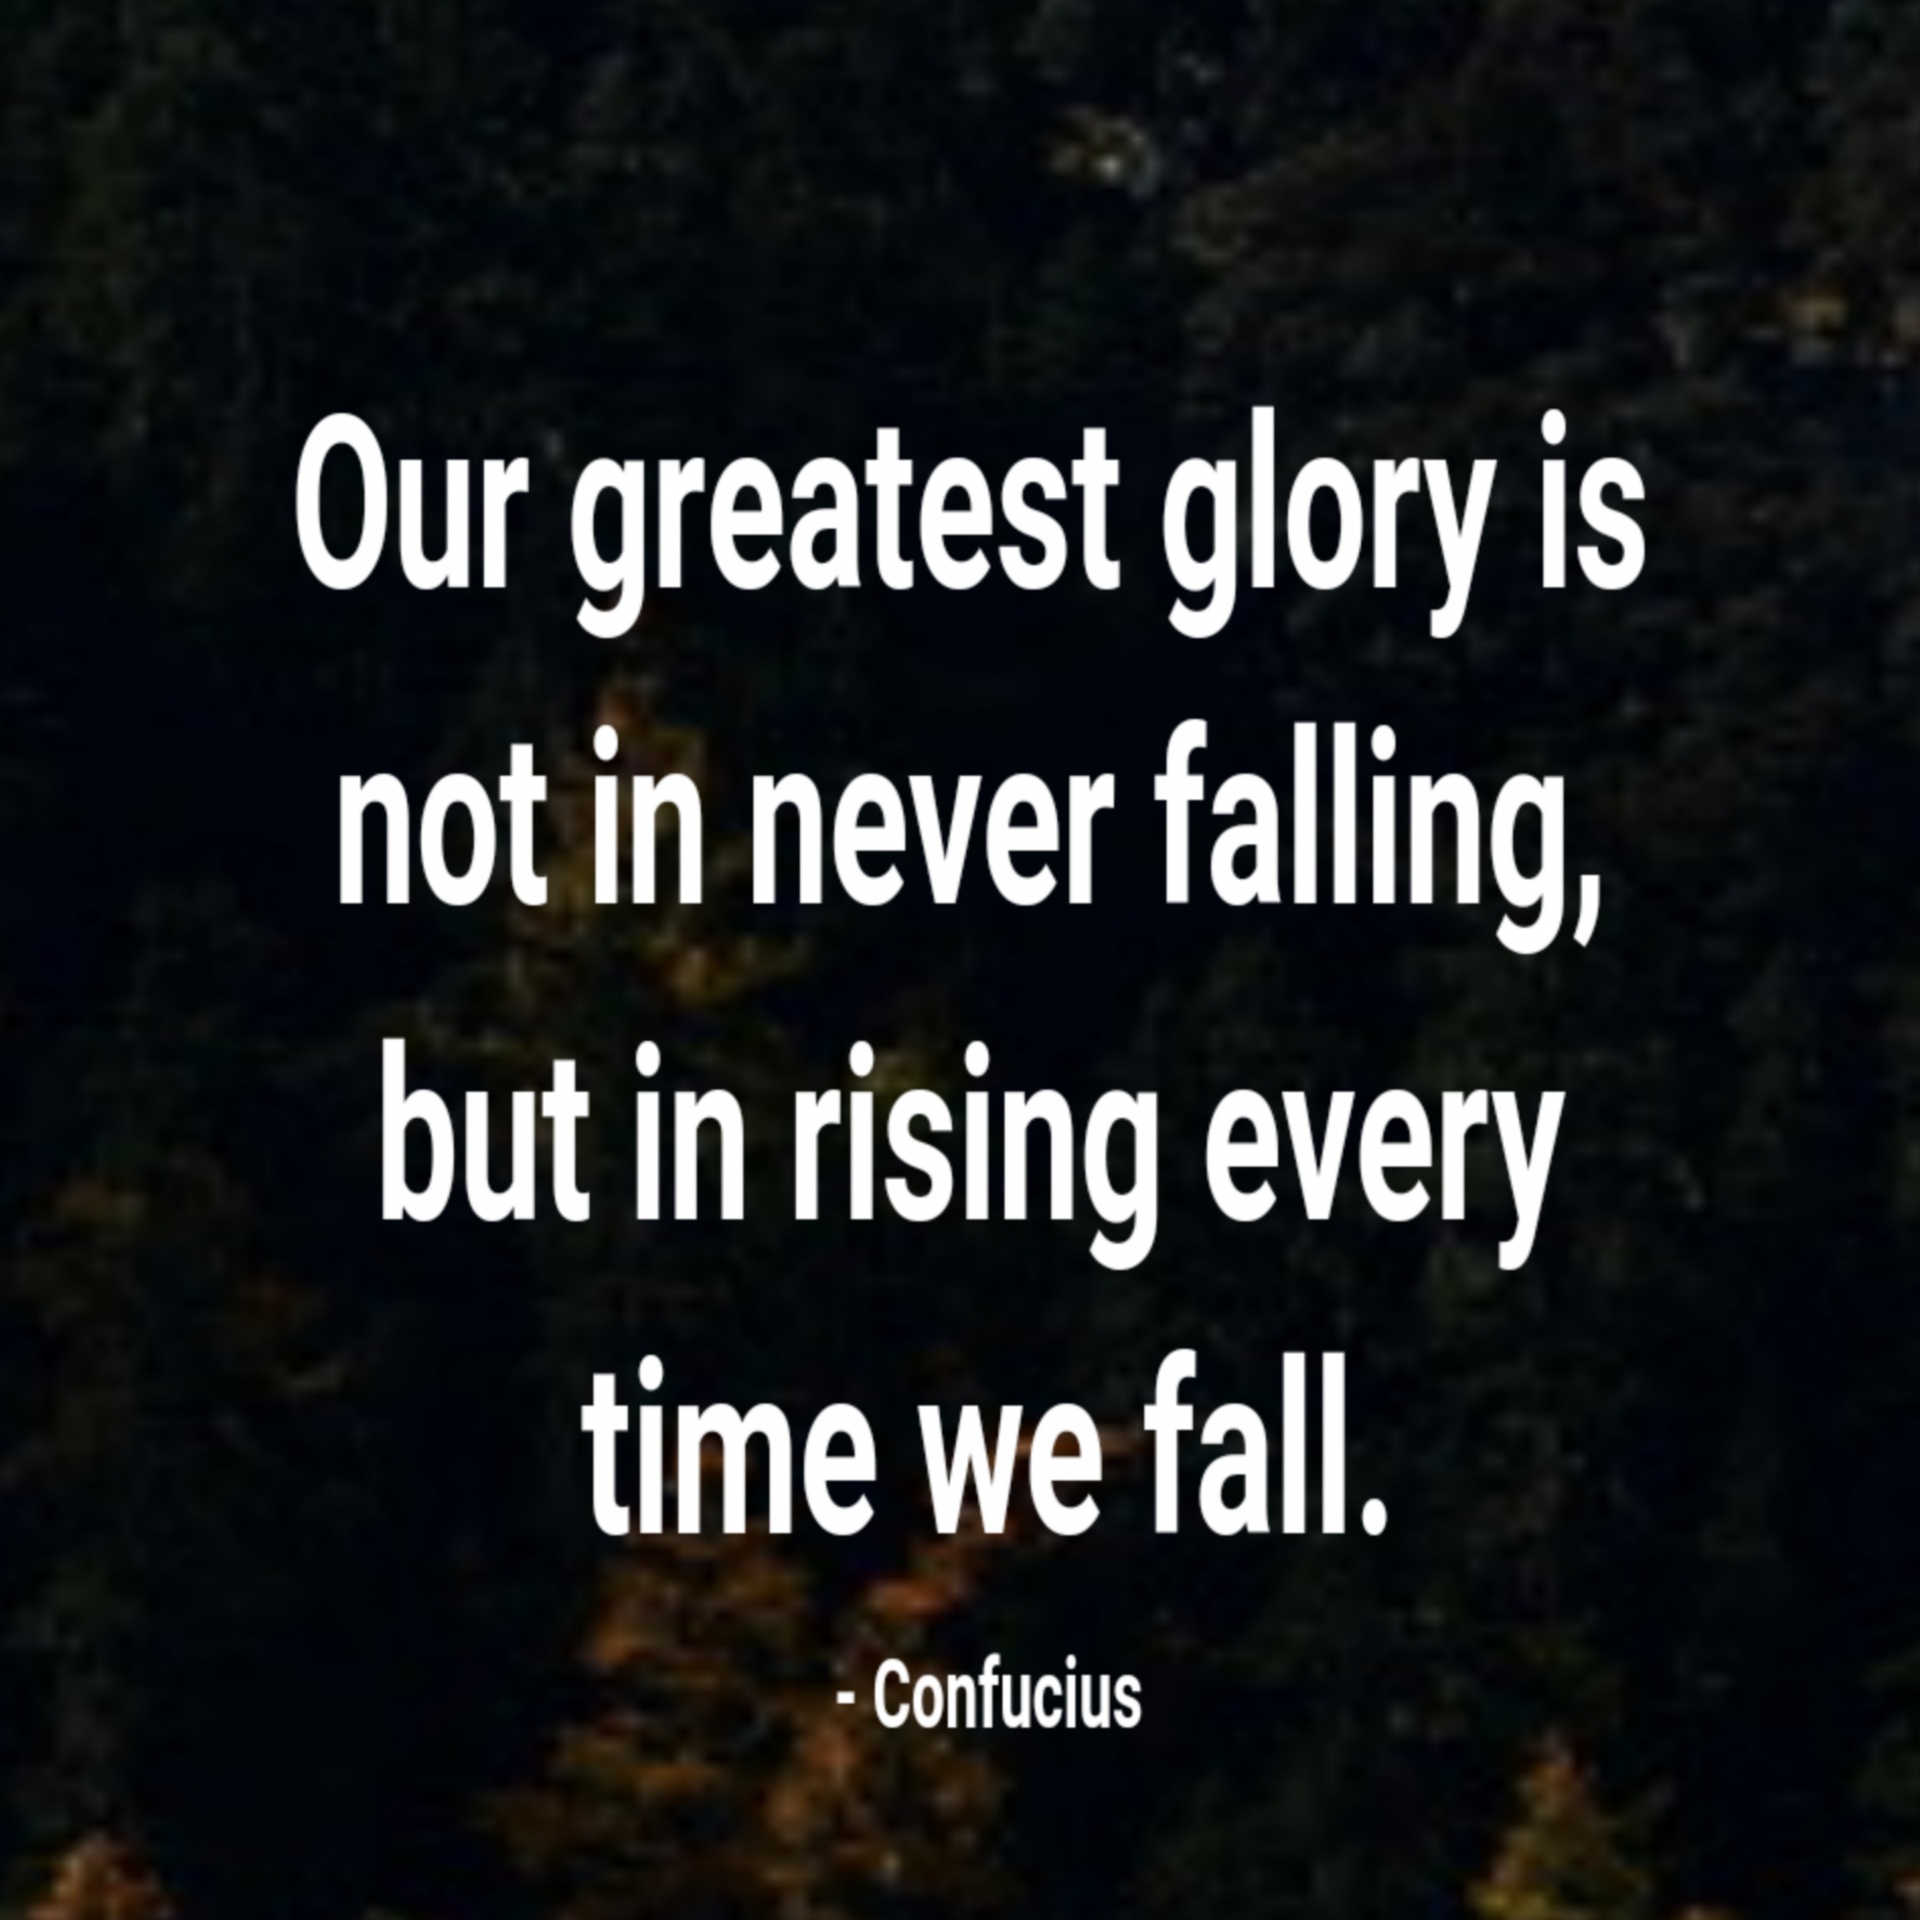 Quote by Confucius on glory